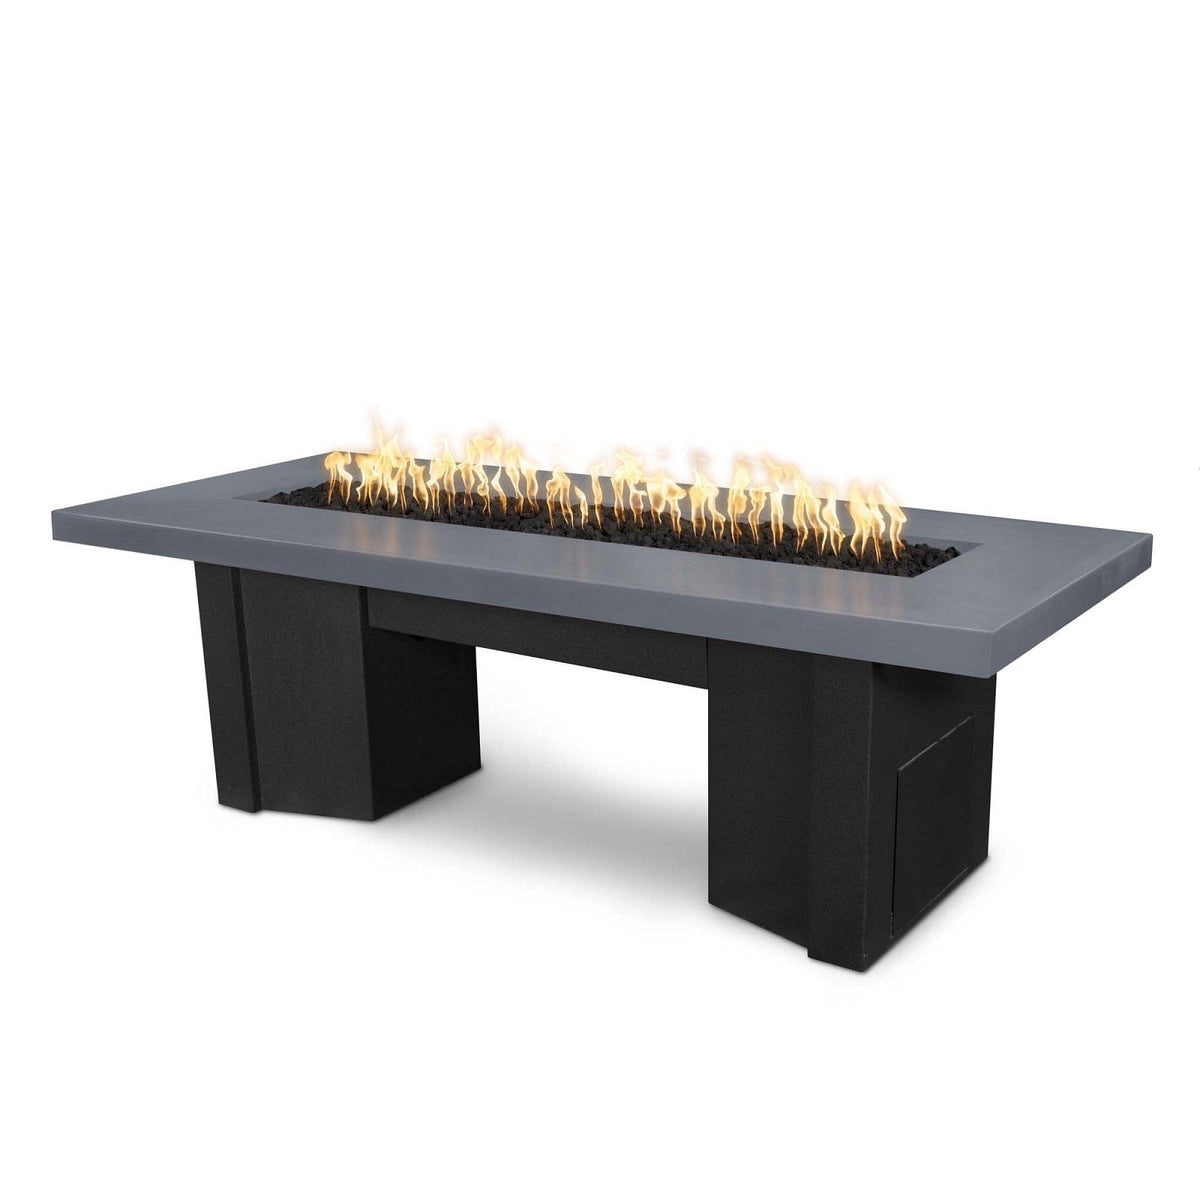 The Outdoor Plus Fire Features Gray (-GRY) / Black Powder Coated Steel (-BLK) The Outdoor Plus 60&quot; Alameda Fire Table Smooth Concrete in Liquid Propane - 110V Plug &amp; Play Electronic Ignition / OPT-ALMGFRC60EKIT-LP